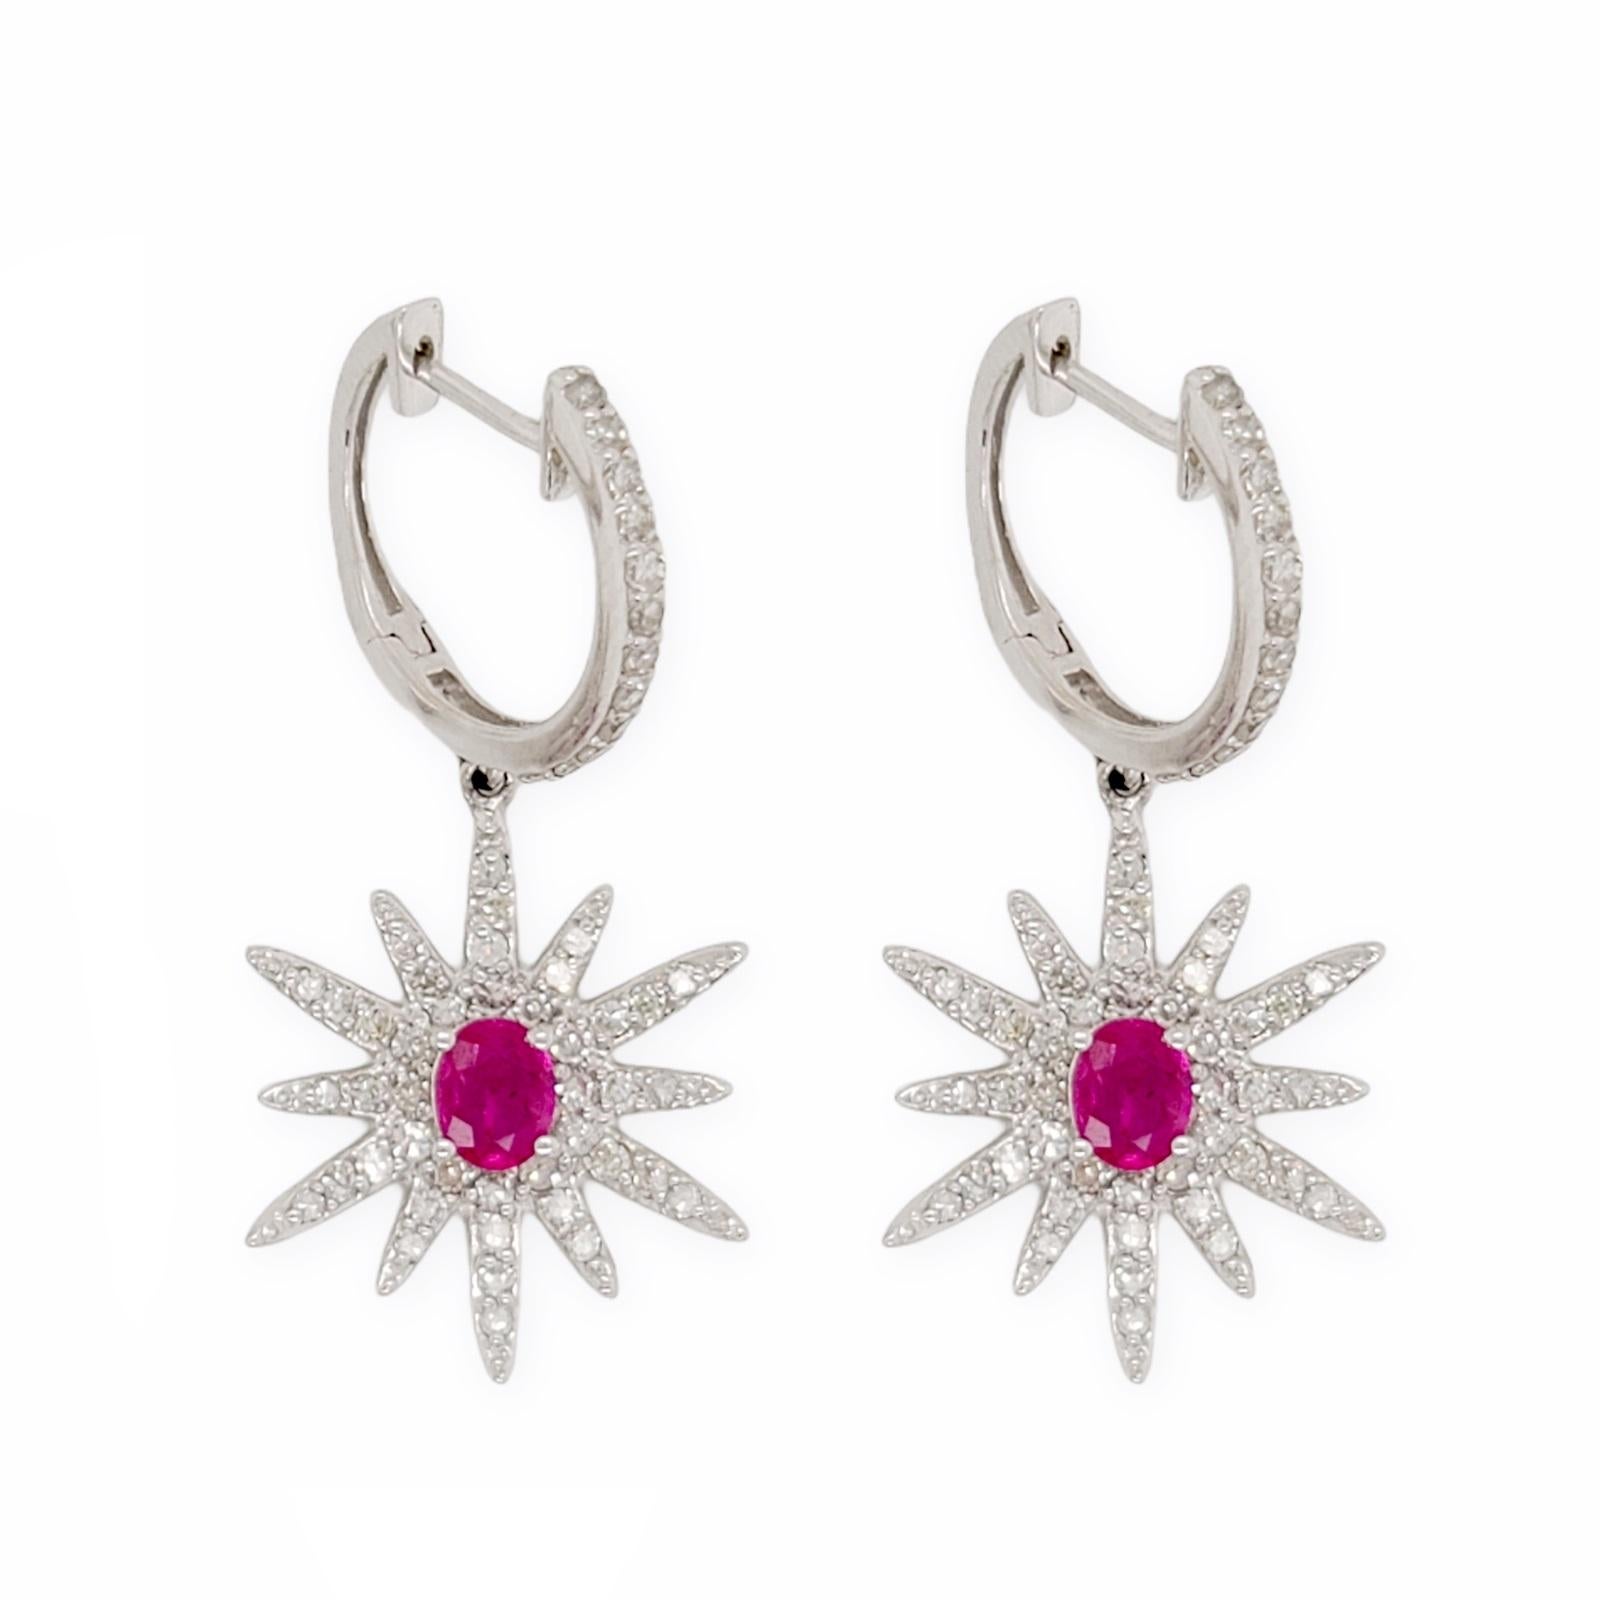 1.60 CT Natural Ruby & 0.45 CT Diamonds in 18K White Gold Flower Earrings In Excellent Condition For Sale In Los Angeles, CA